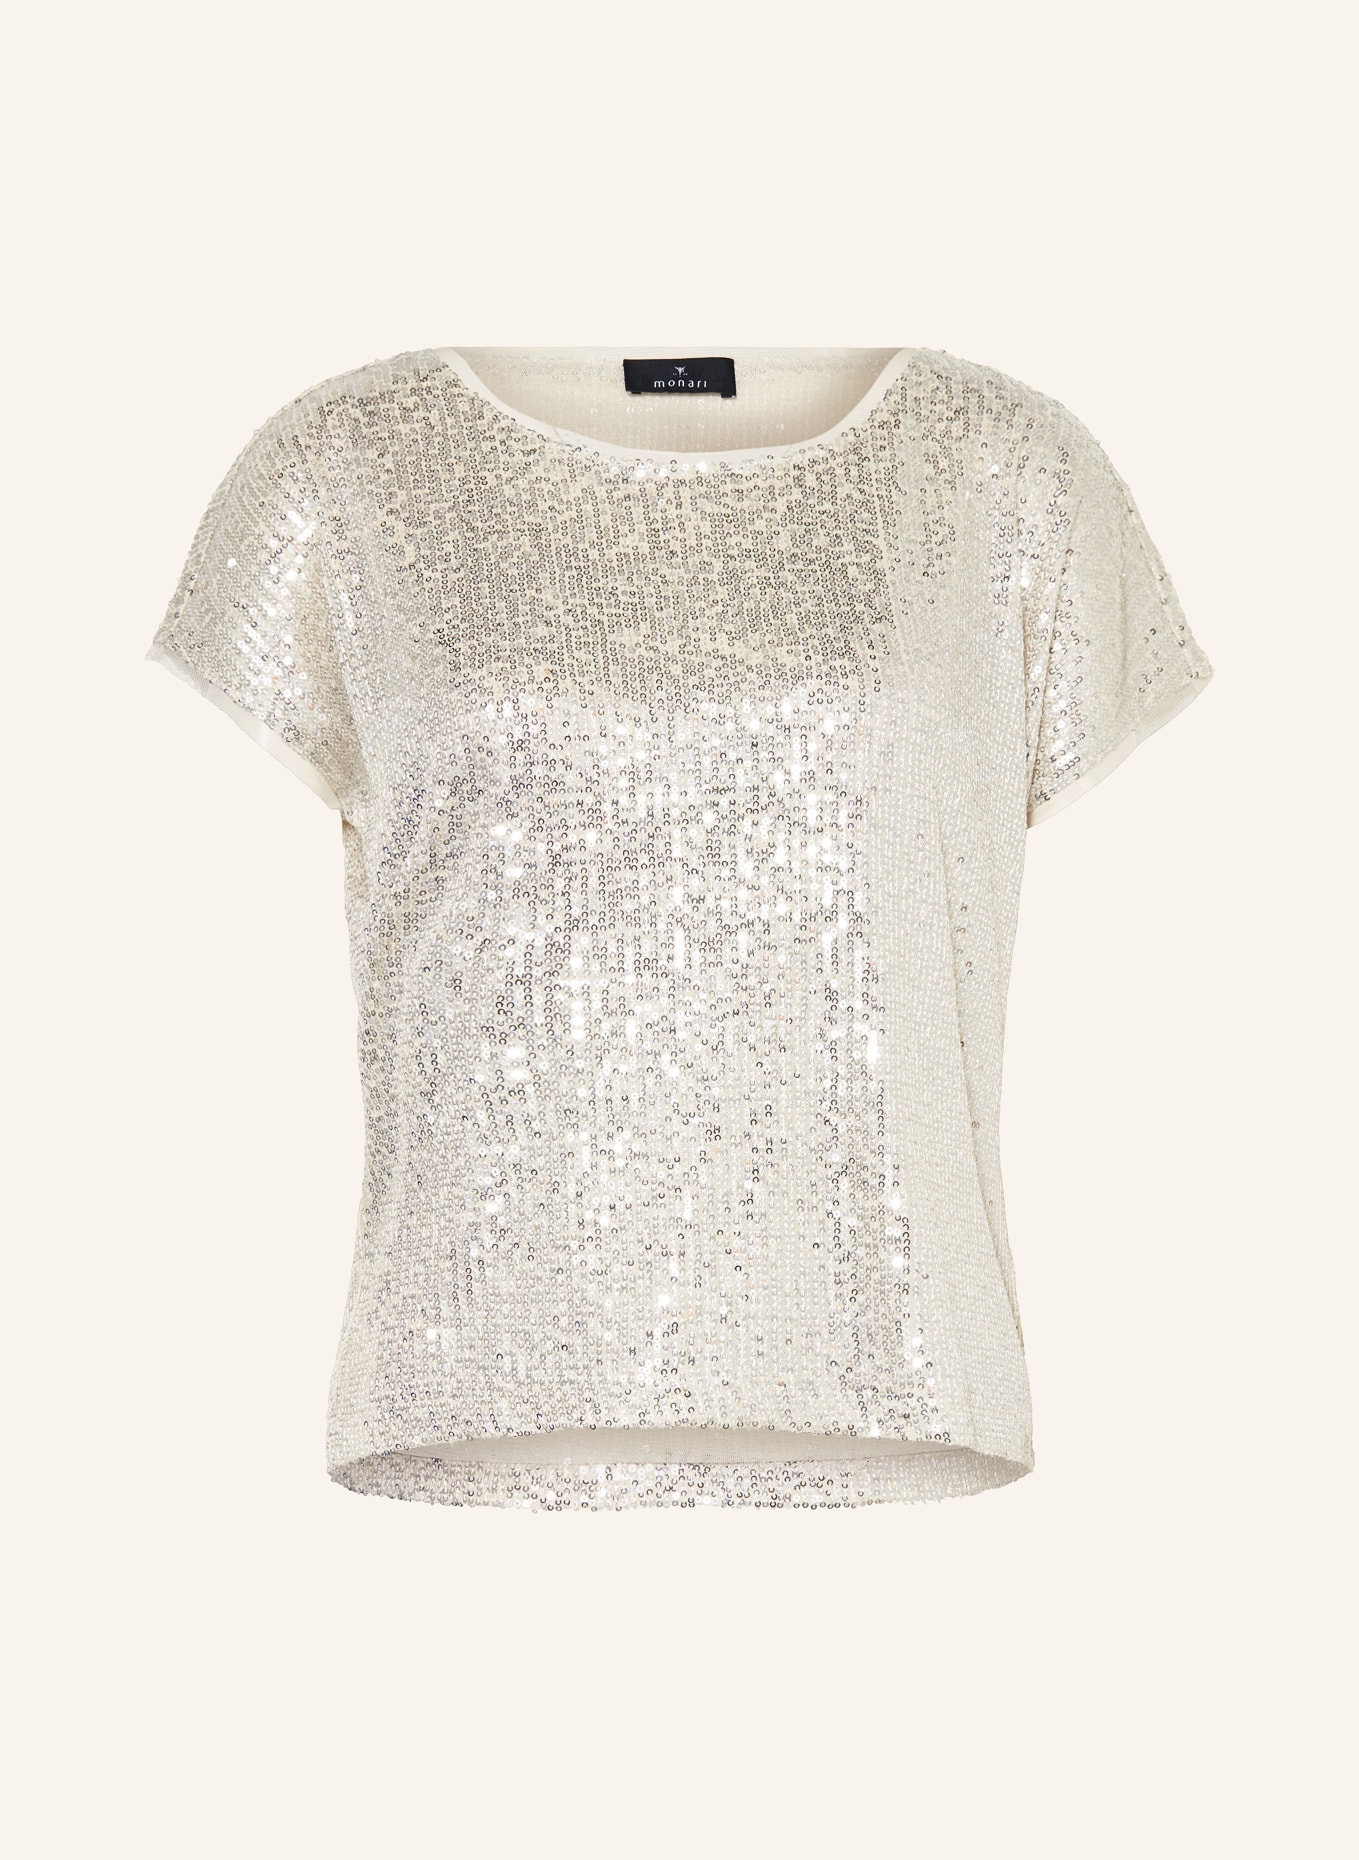 monari Shirt blouse with sequins, Color: SILVER (Image 1)